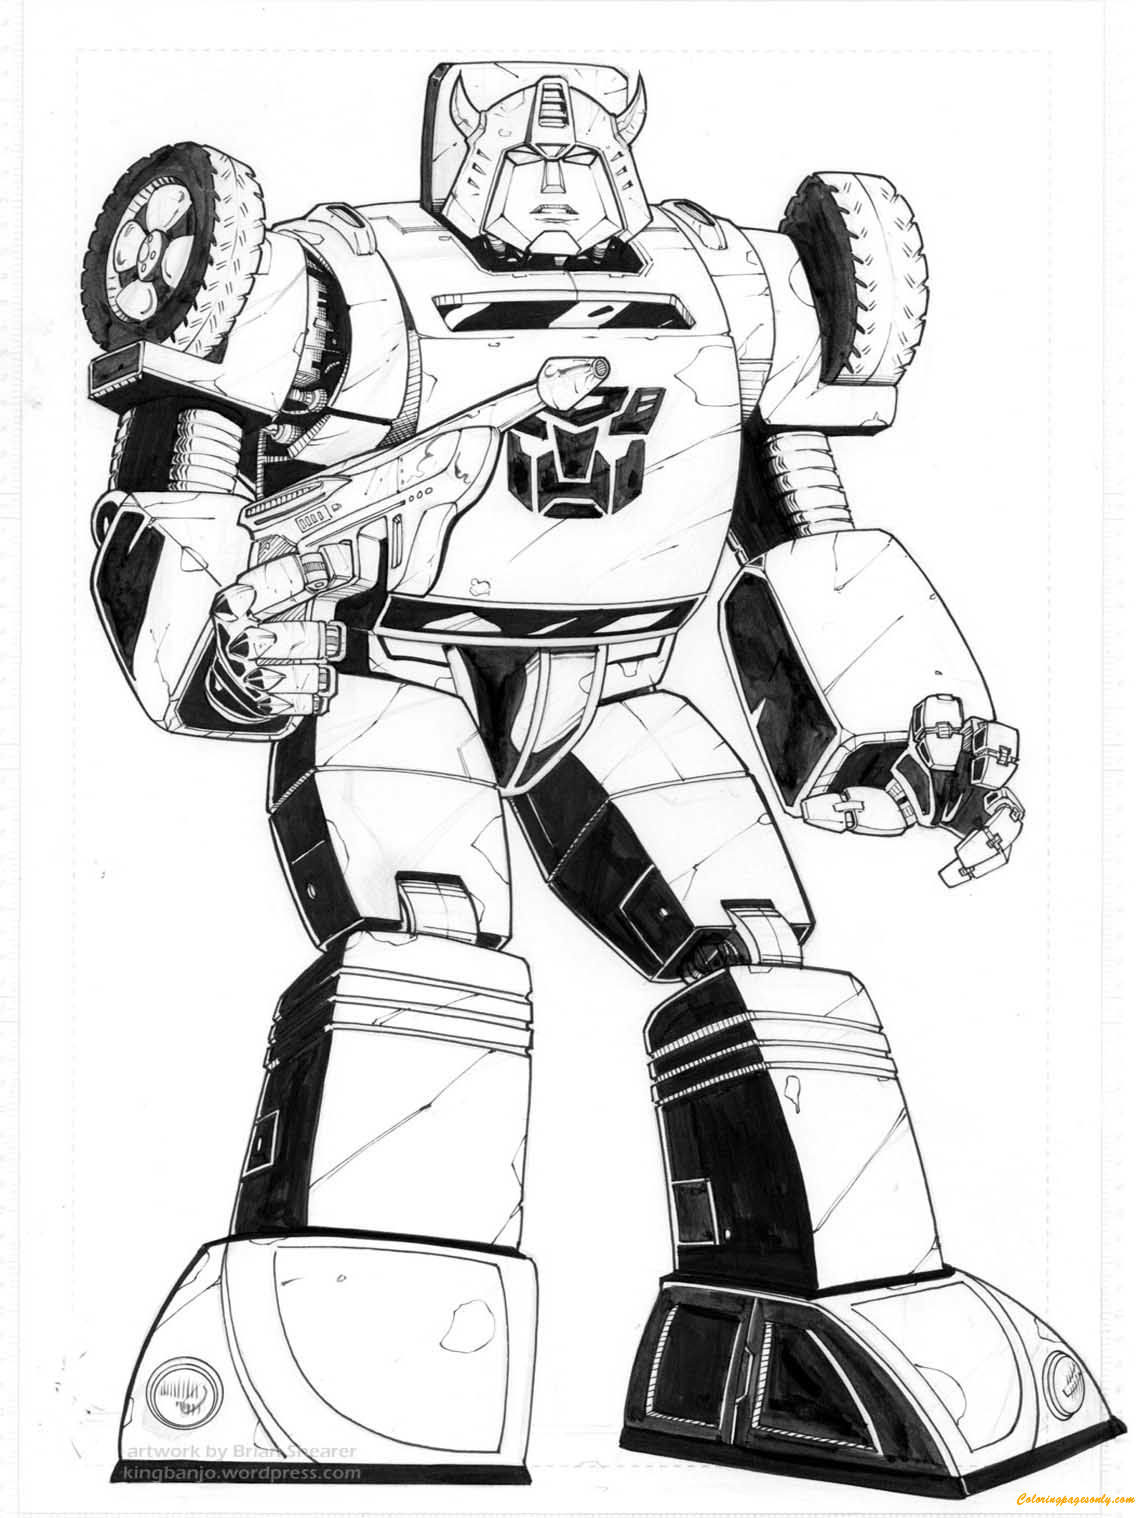 Bumblebee Transformers Coloring Page - Free Coloring Pages Online